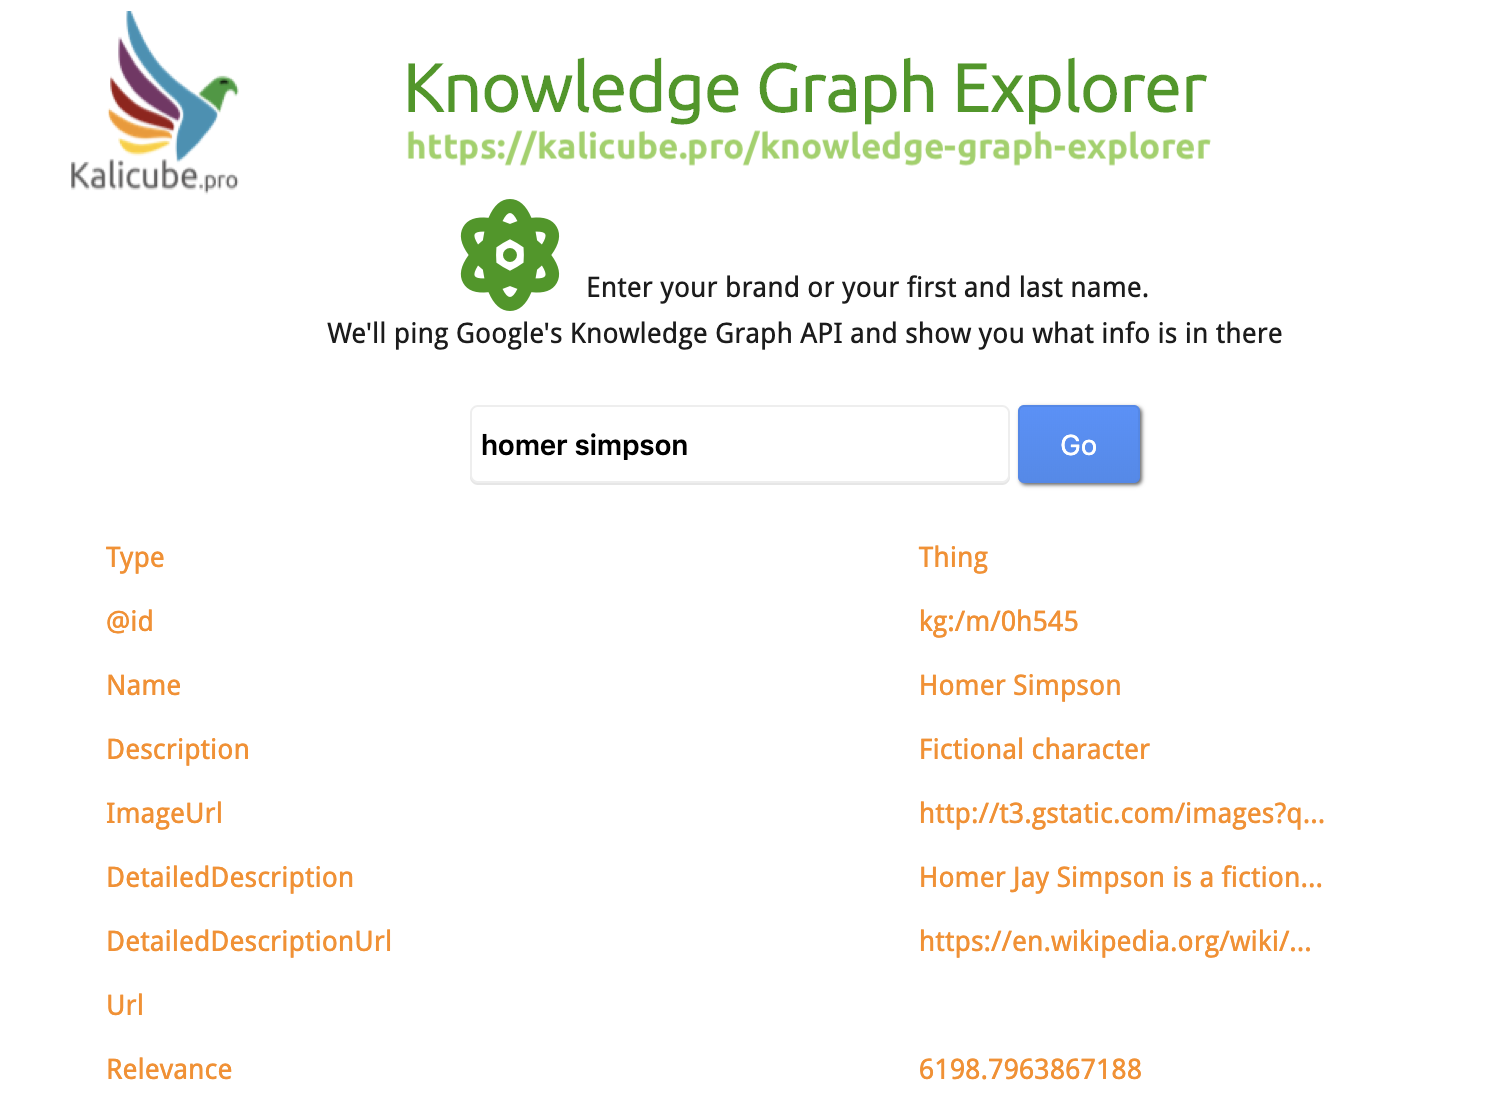 Knowledge Graph Algorithm Update Summer 2019 (a.k.a. Budapest)